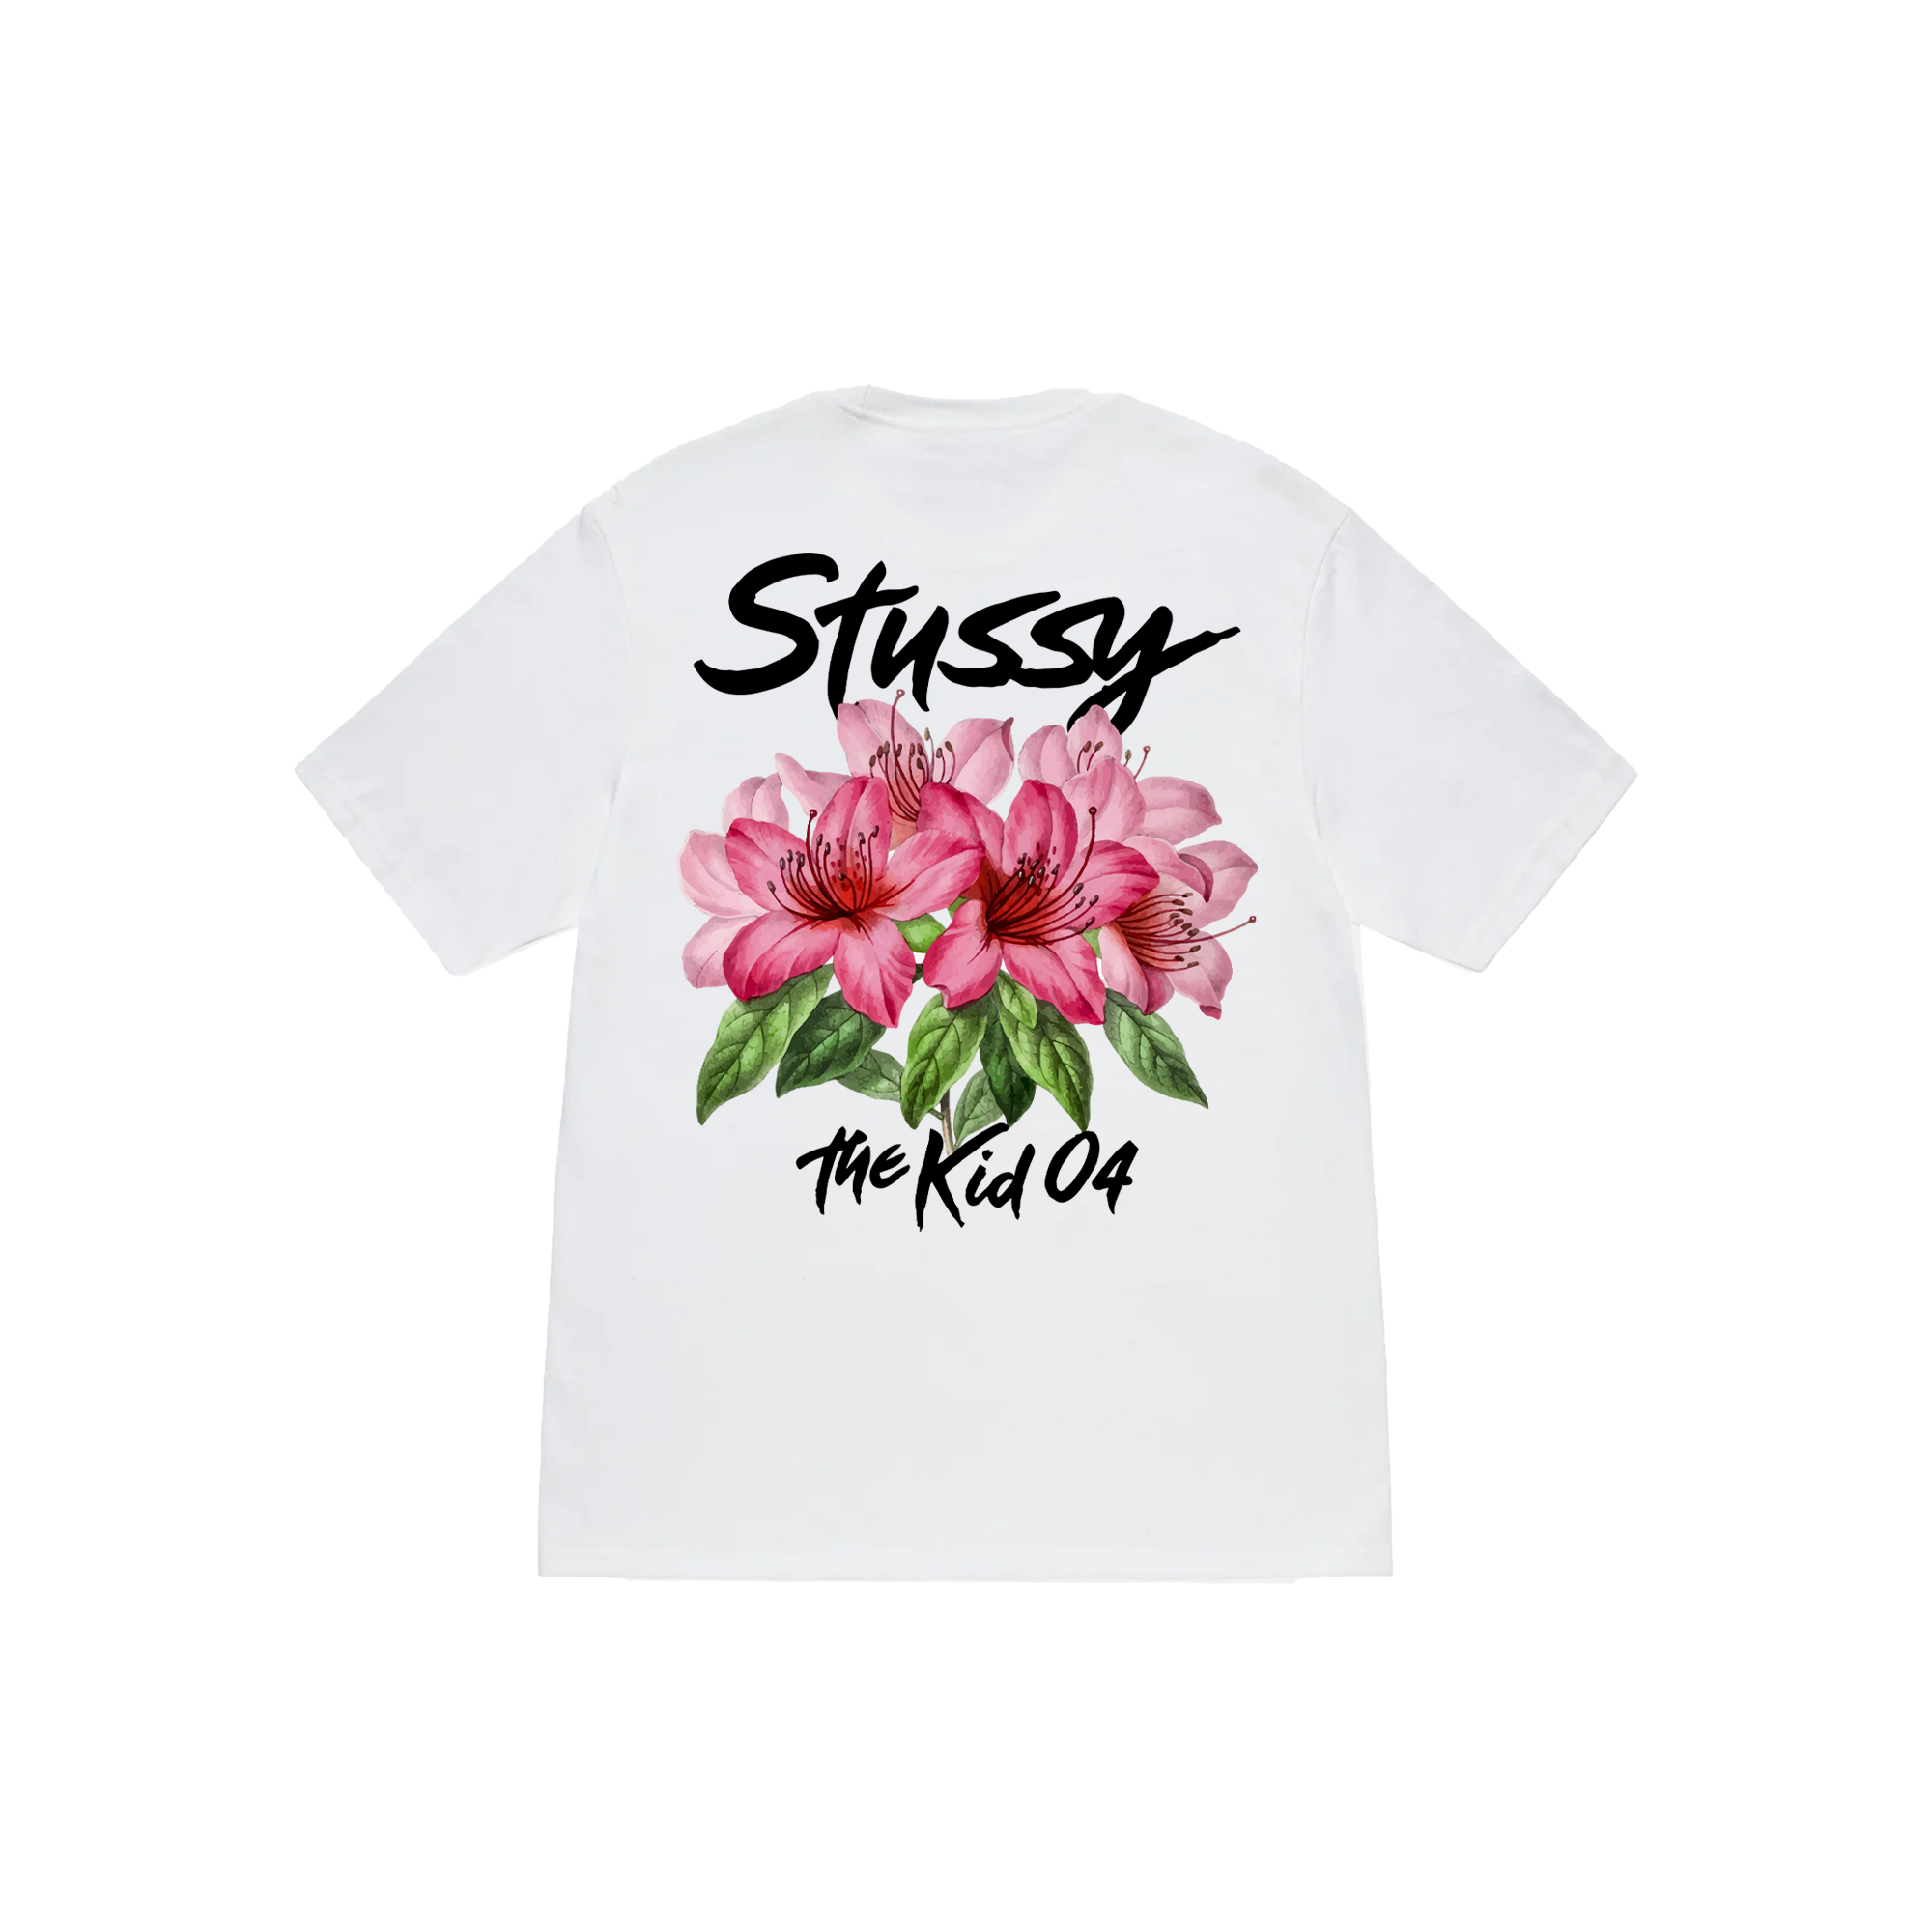 Stussy Floral The Kid 04 T-Shirt